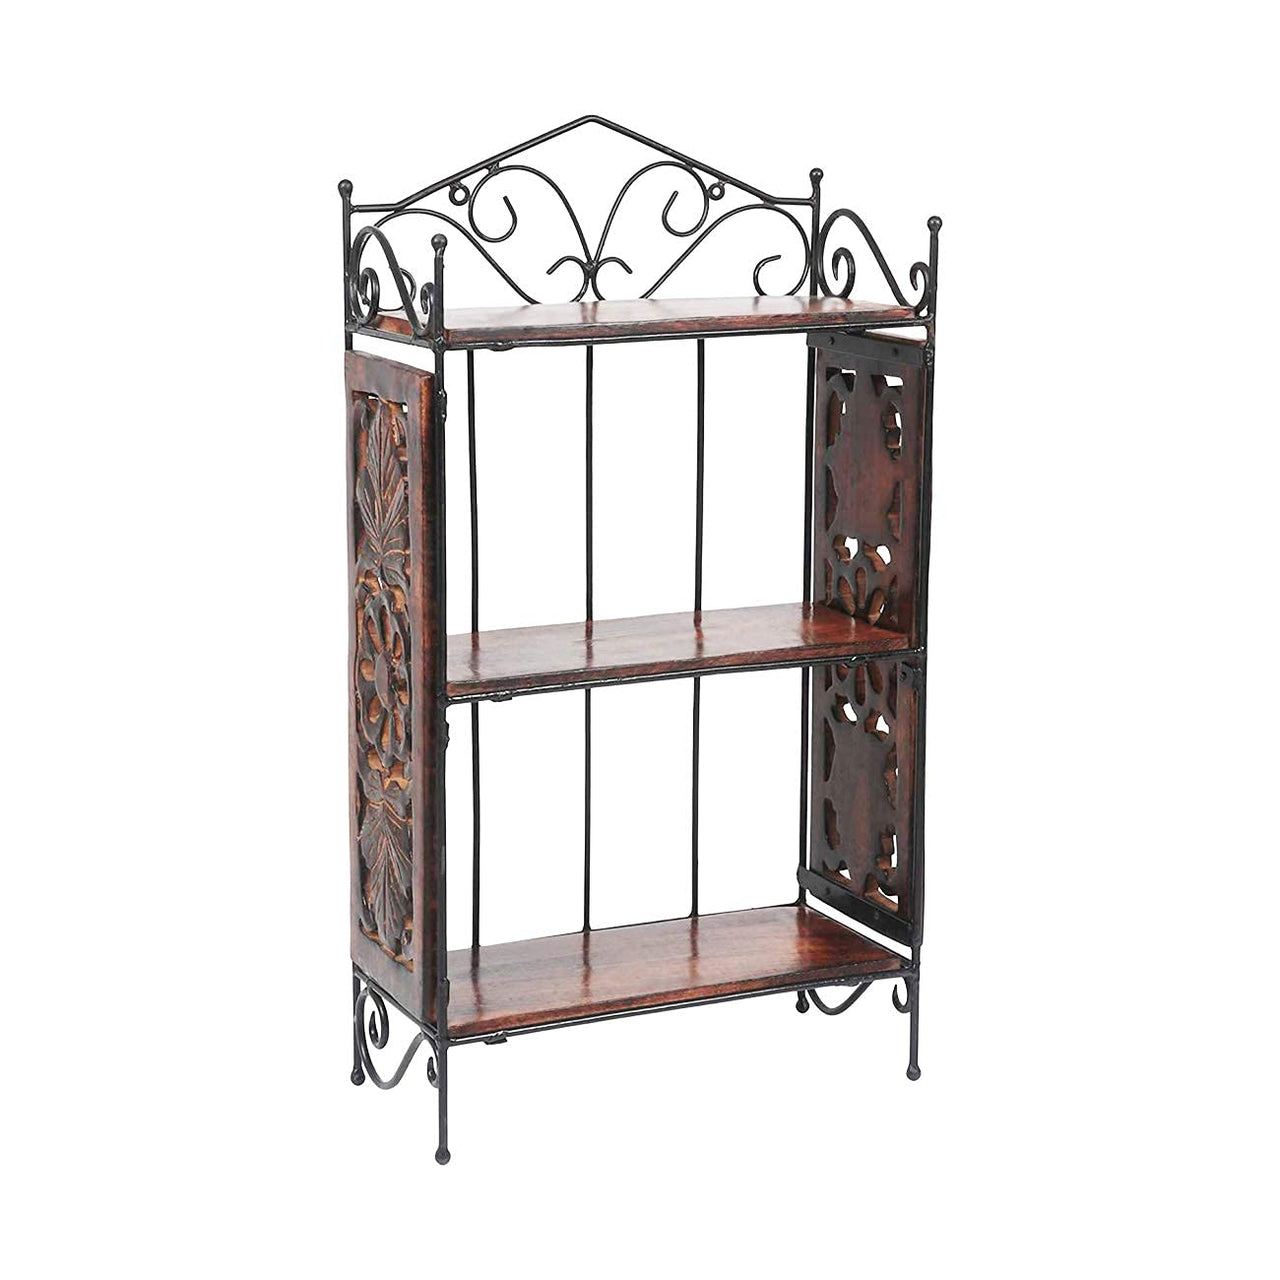 Wrought Iron & Wooden Cutlery Racks Foldable Spice Shelf Rack Kitchen Bathroom Counter top Storage Holder Organizer (3 Tier, Large) Dime Store